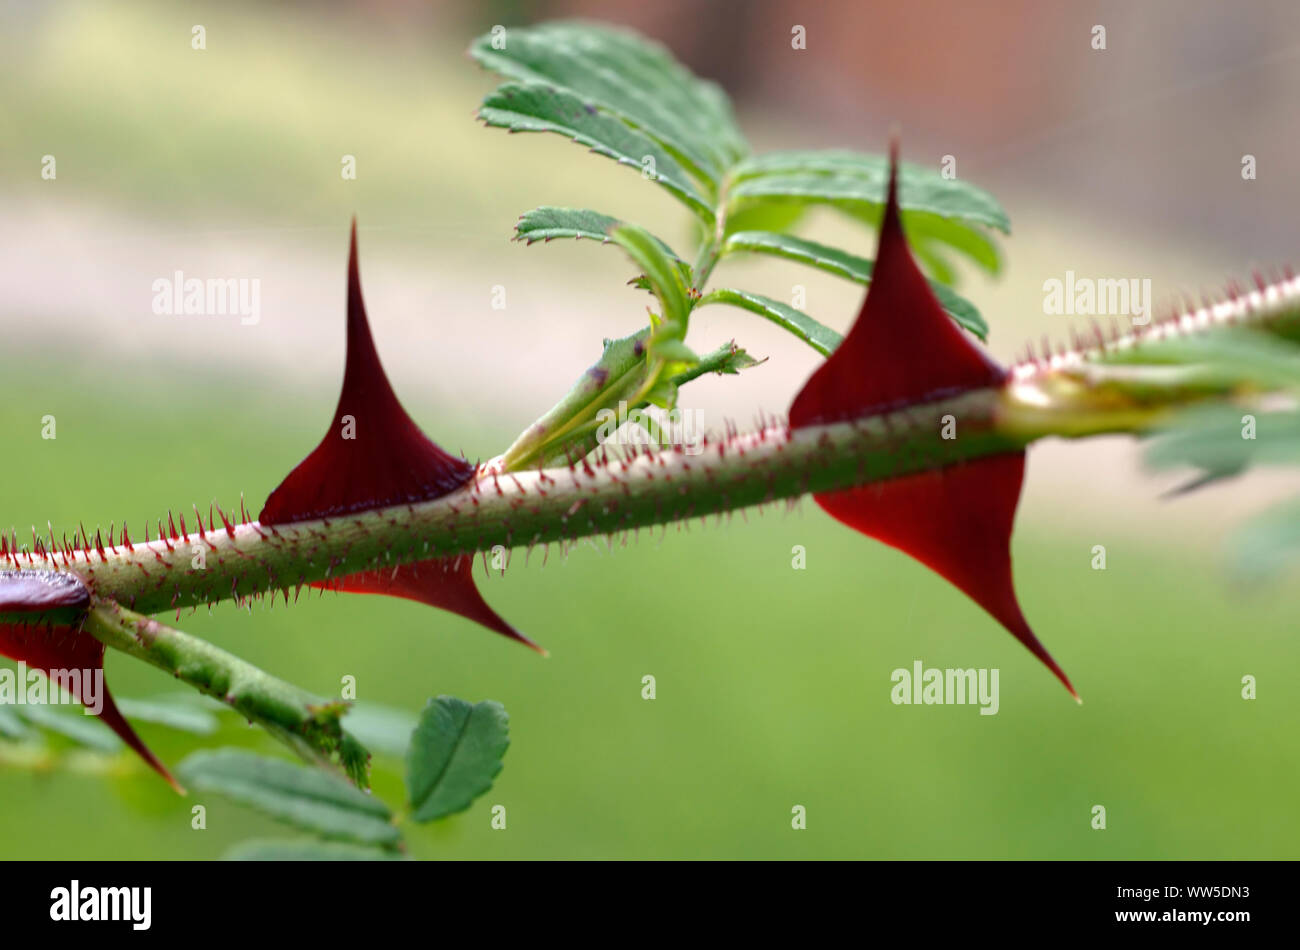 Thorns of the stalk of a Rosa omeiensis rose, Stock Photo